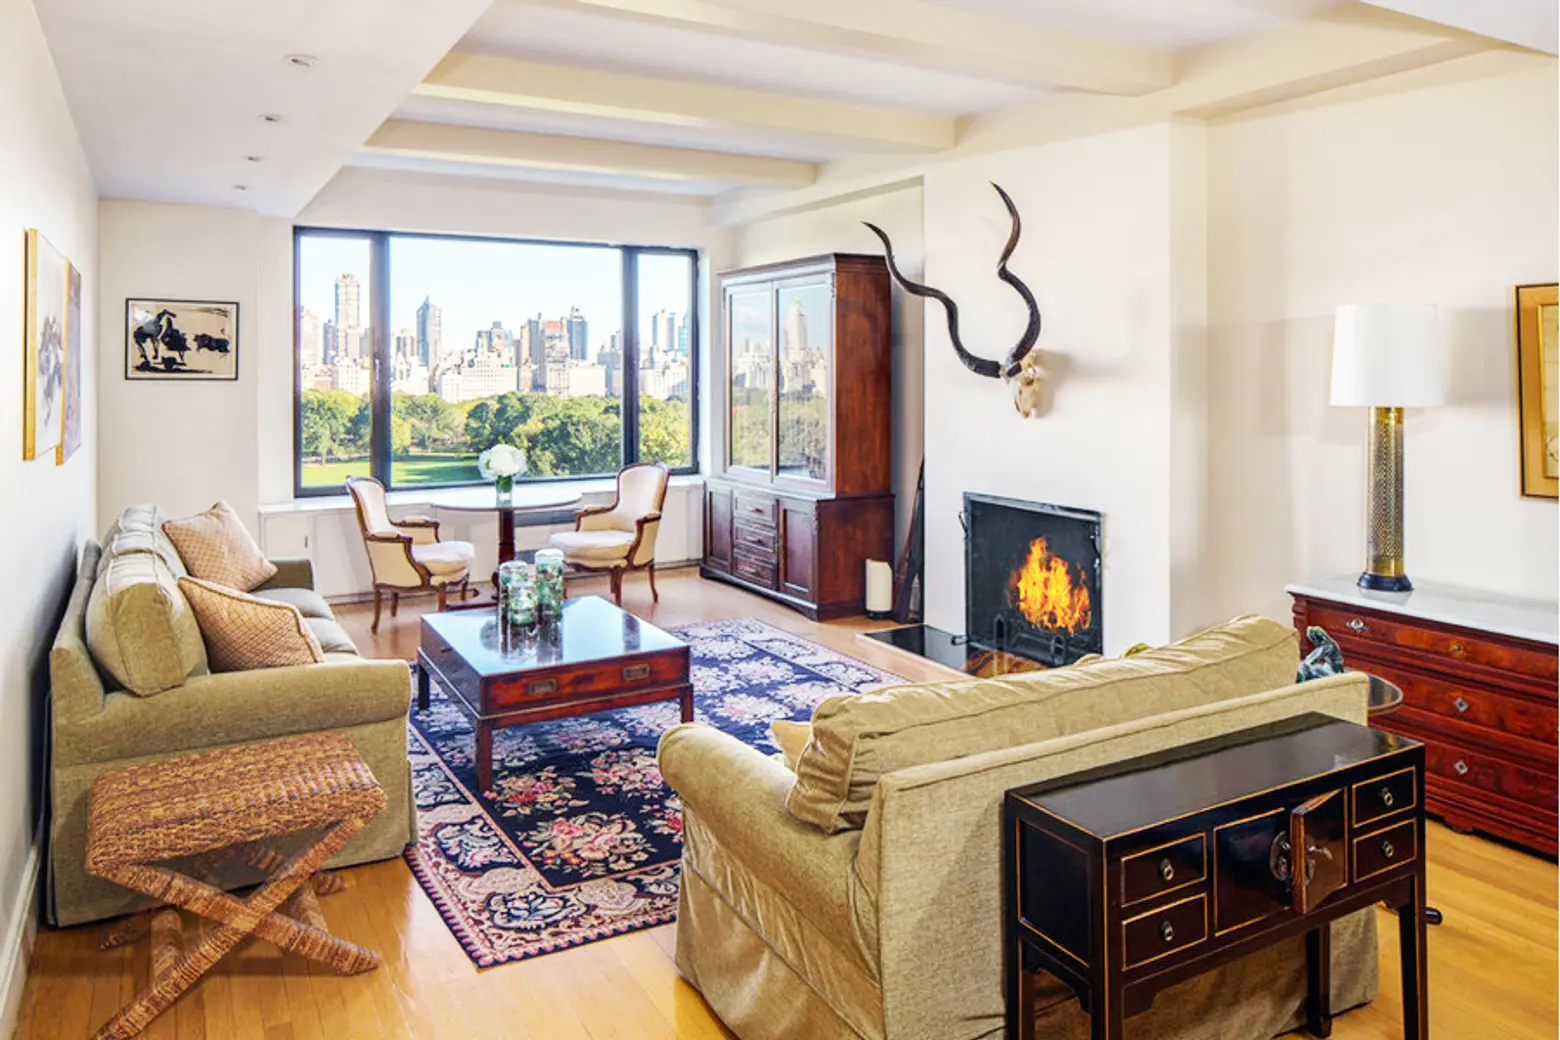 ‘Simpsons’ Star Hank Azaria Buys New Pad With Stunning Views